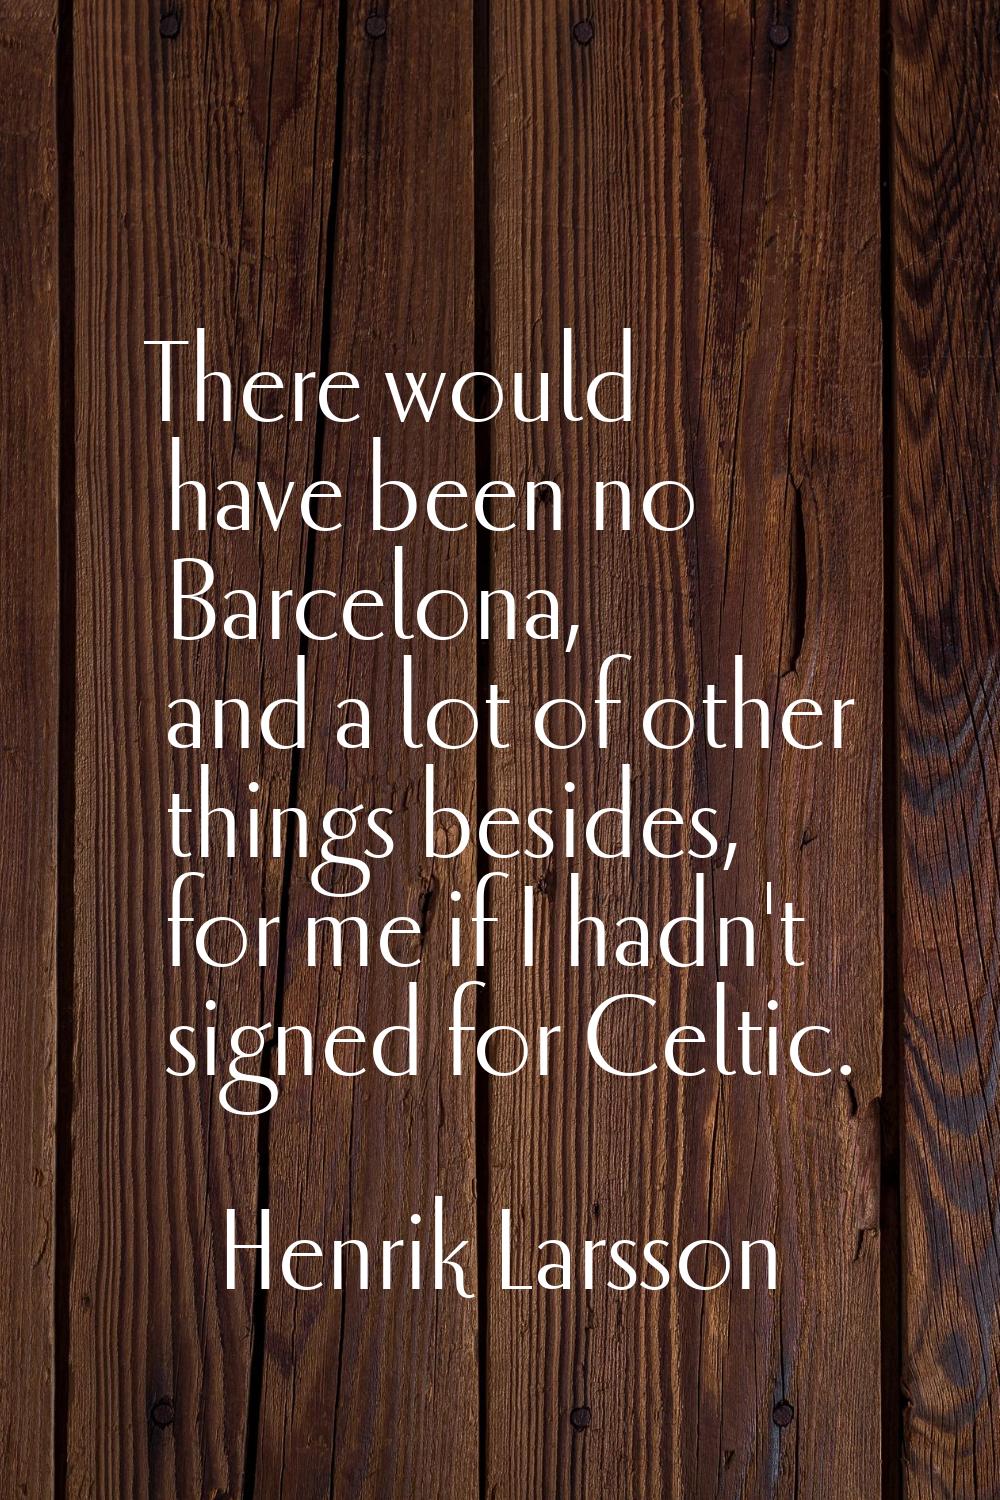 There would have been no Barcelona, and a lot of other things besides, for me if I hadn't signed fo